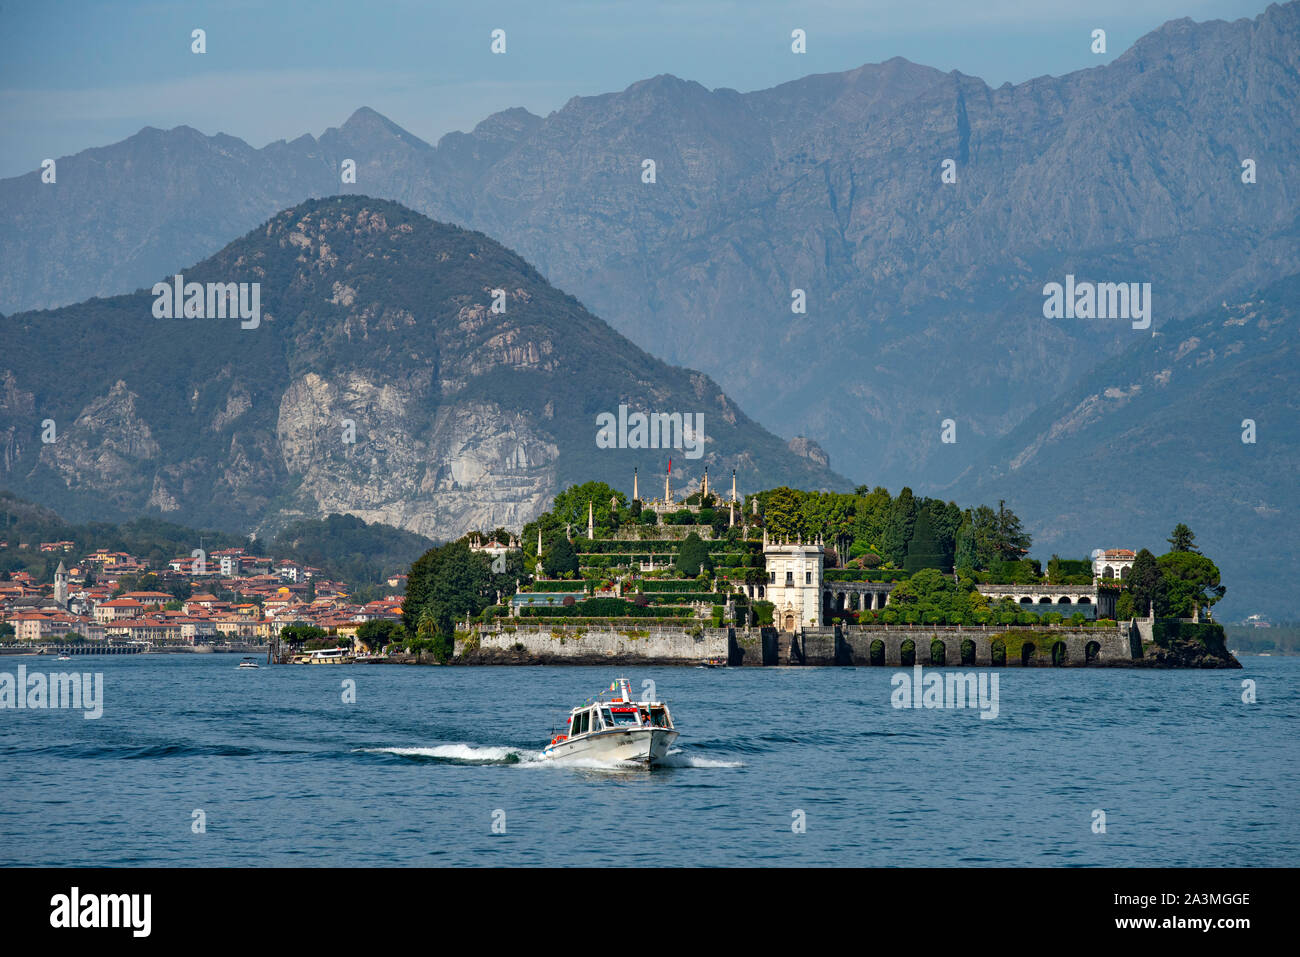 Lake Maggiore and the Borromean-Borromee Islands, Stresa, Lombardy-Piedmont Italy. Sept 2019 Showing here: Isola Bella (lit. 'beautiful island') is on Stock Photo